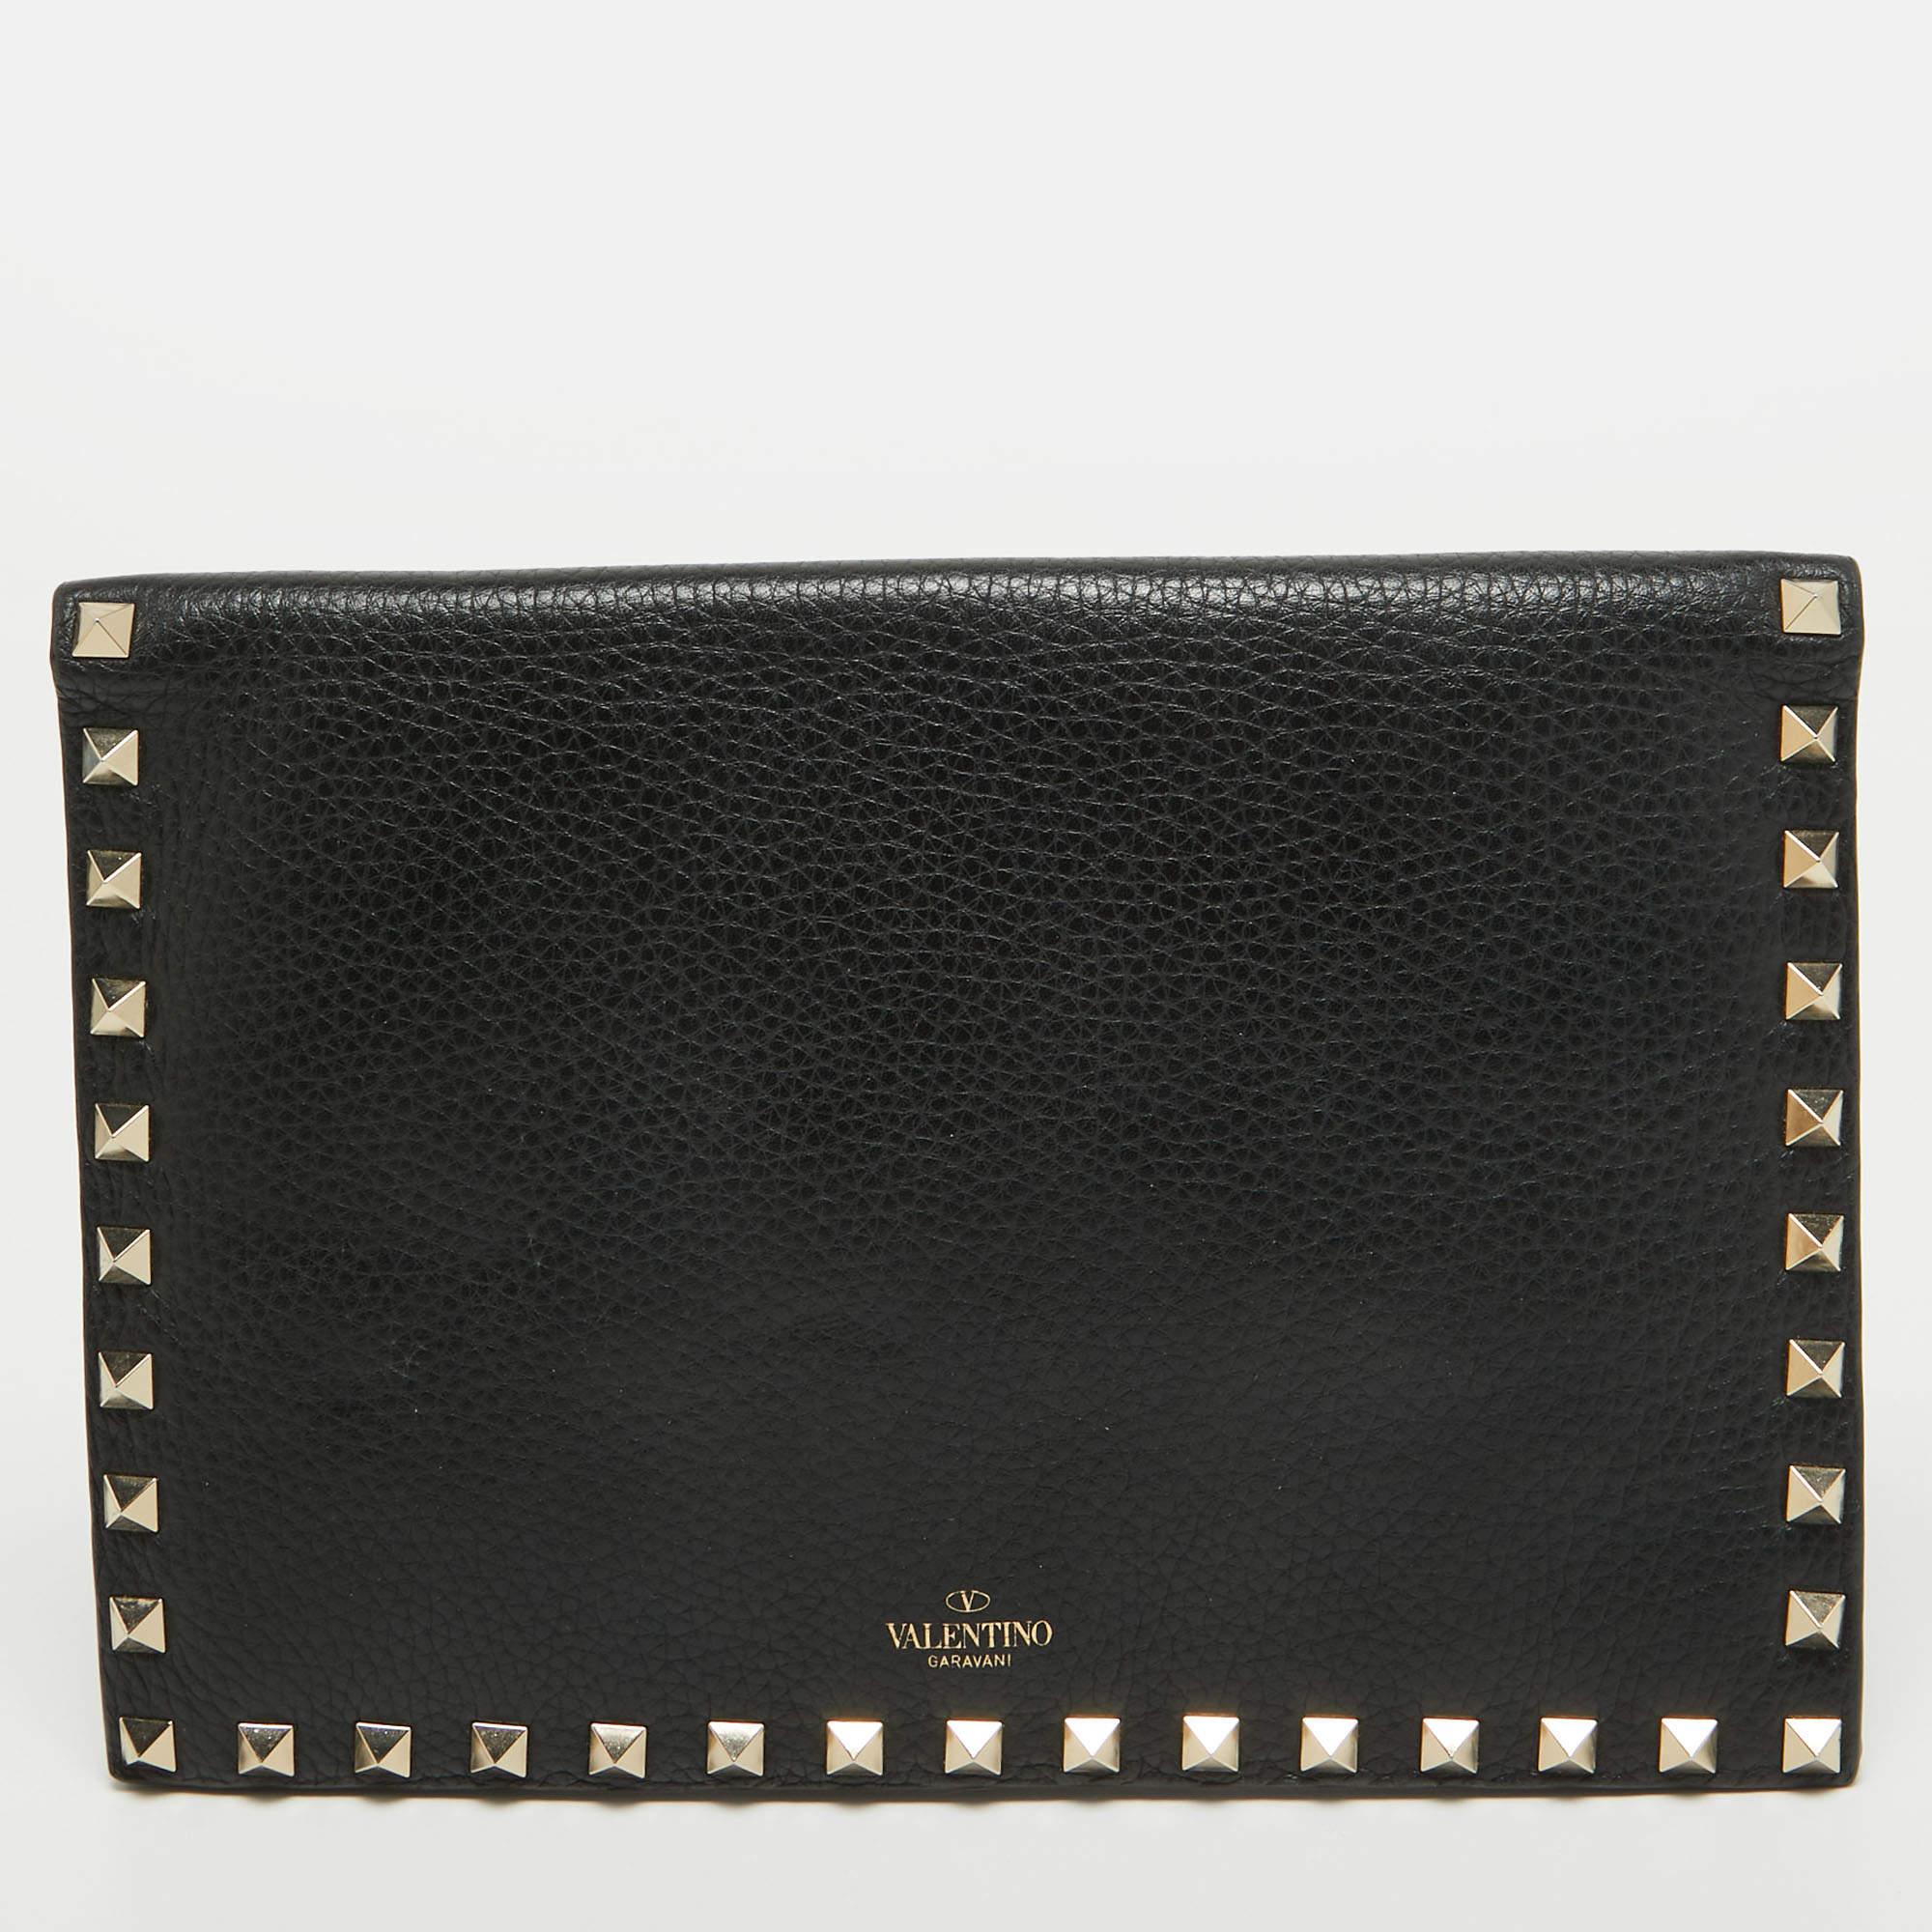 Indulge in timeless luxury with this Valentino clutch. Meticulously crafted, this iconic piece combines heritage, elegance, and craftsmanship, elevating your style to a level of unmatched sophistication.

Includes: Original Dustbag, Extra